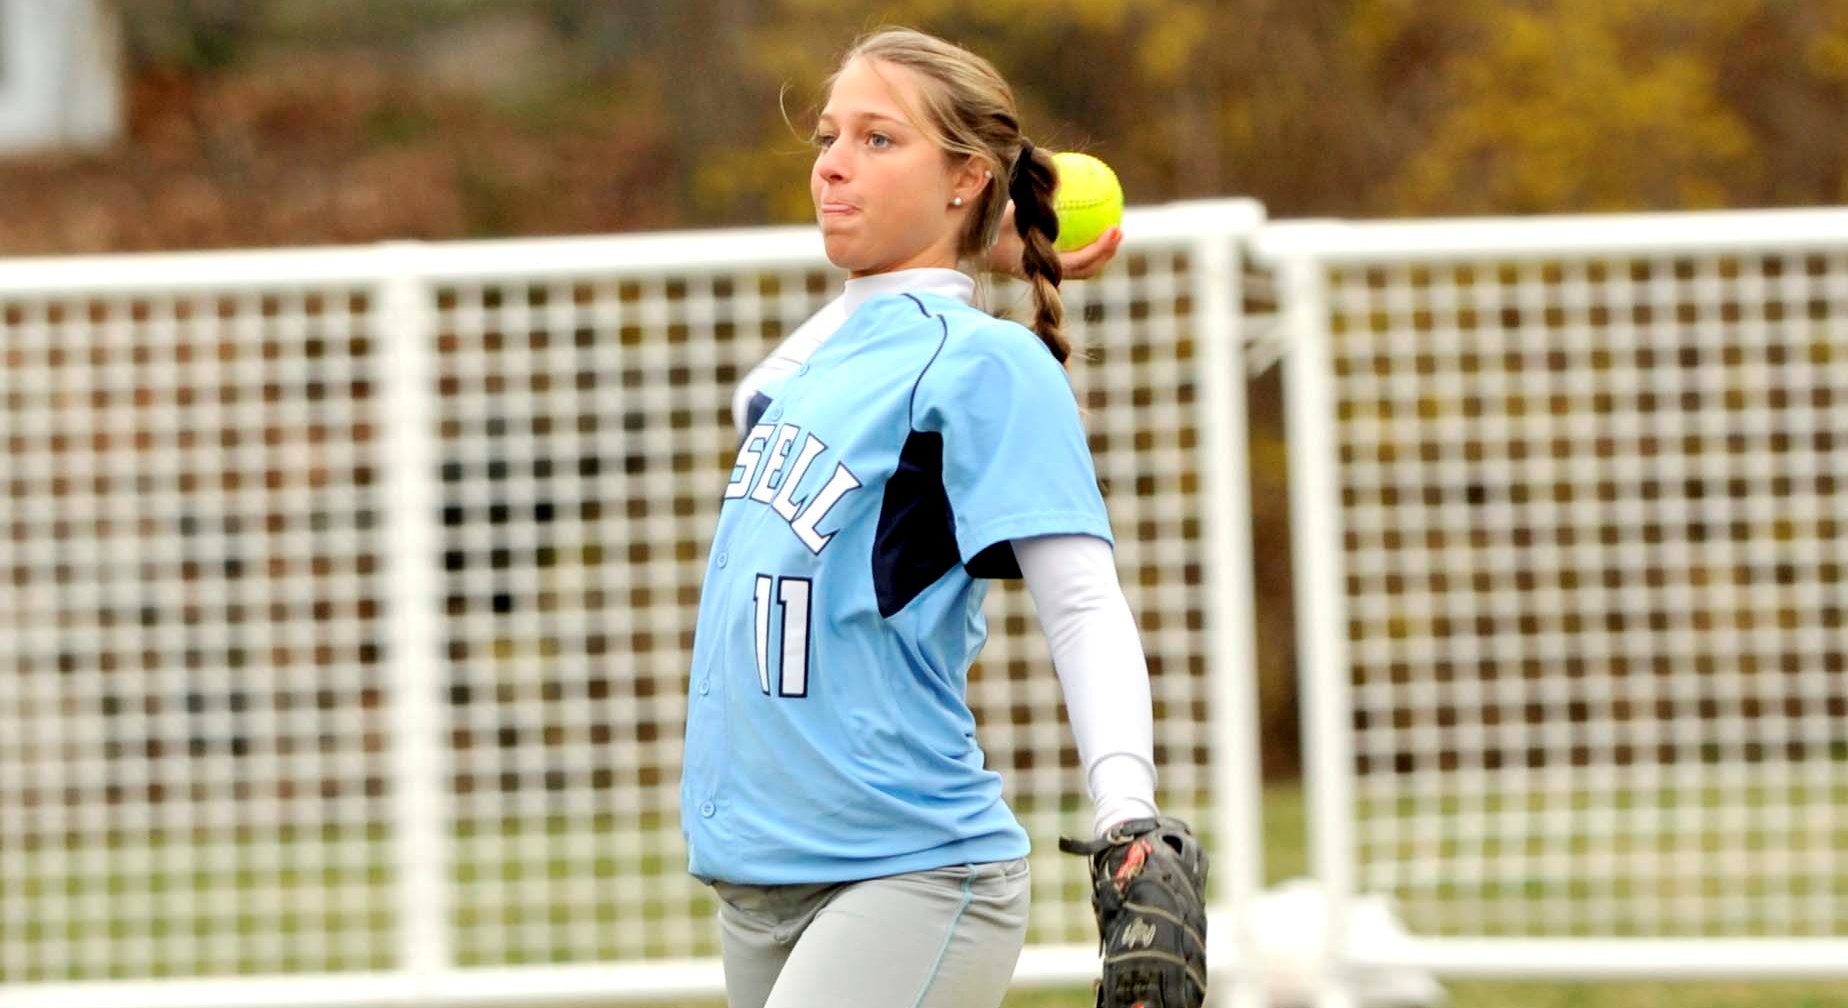 Lasell Falls in Pitcher’s Duel to Rio Grande